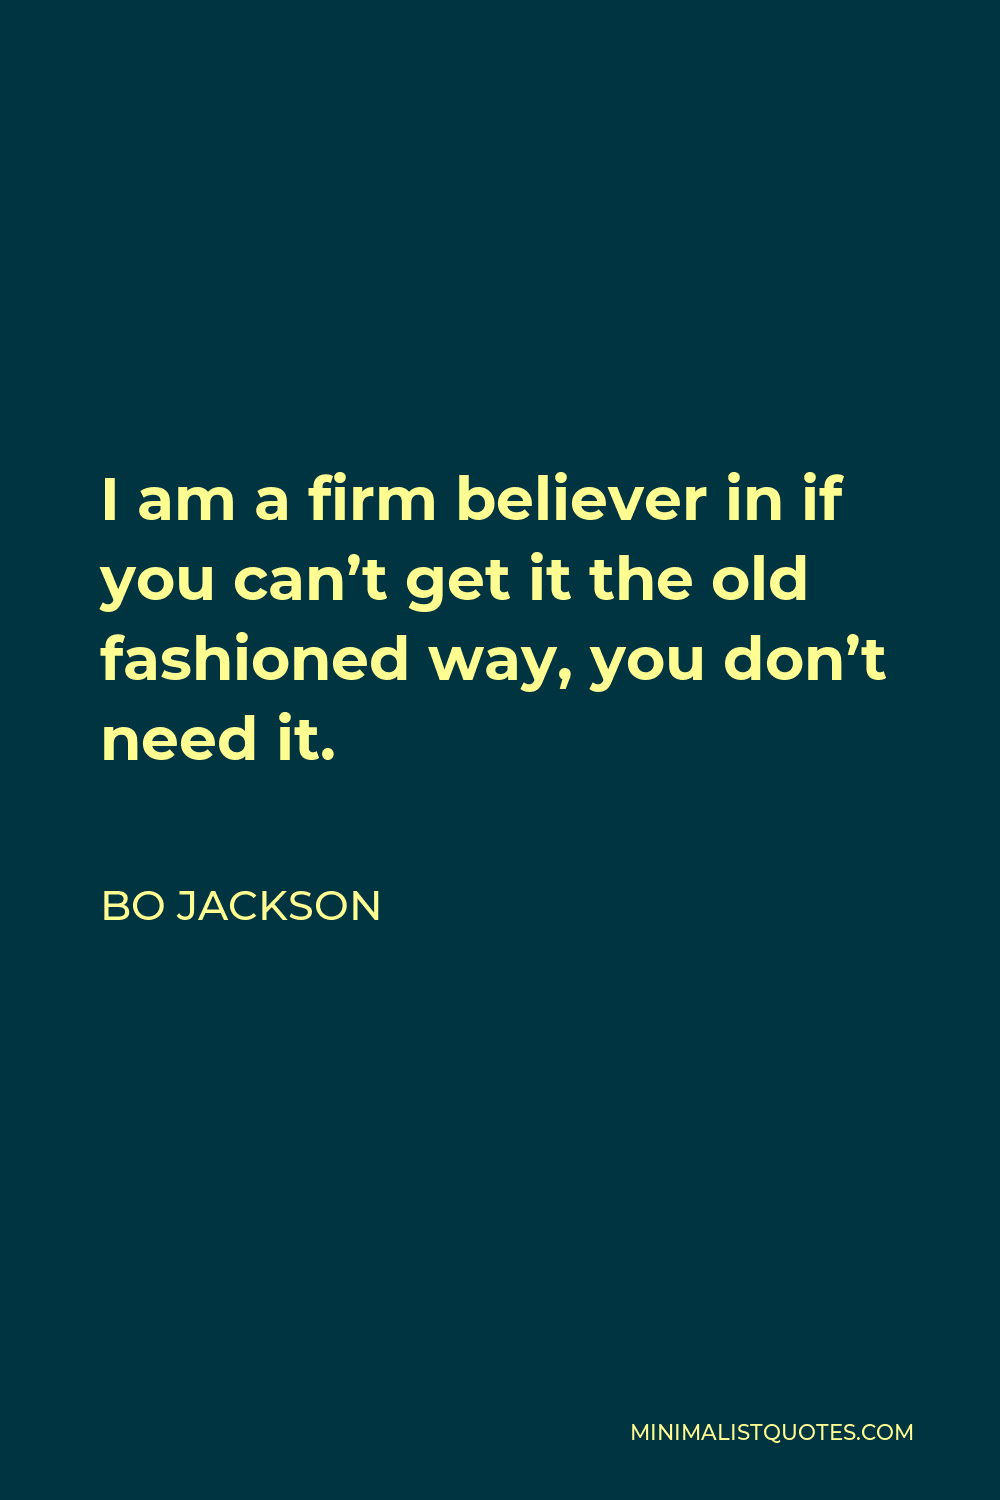 Bo Jackson Quote: “I am a firm believer in if you can't get it the